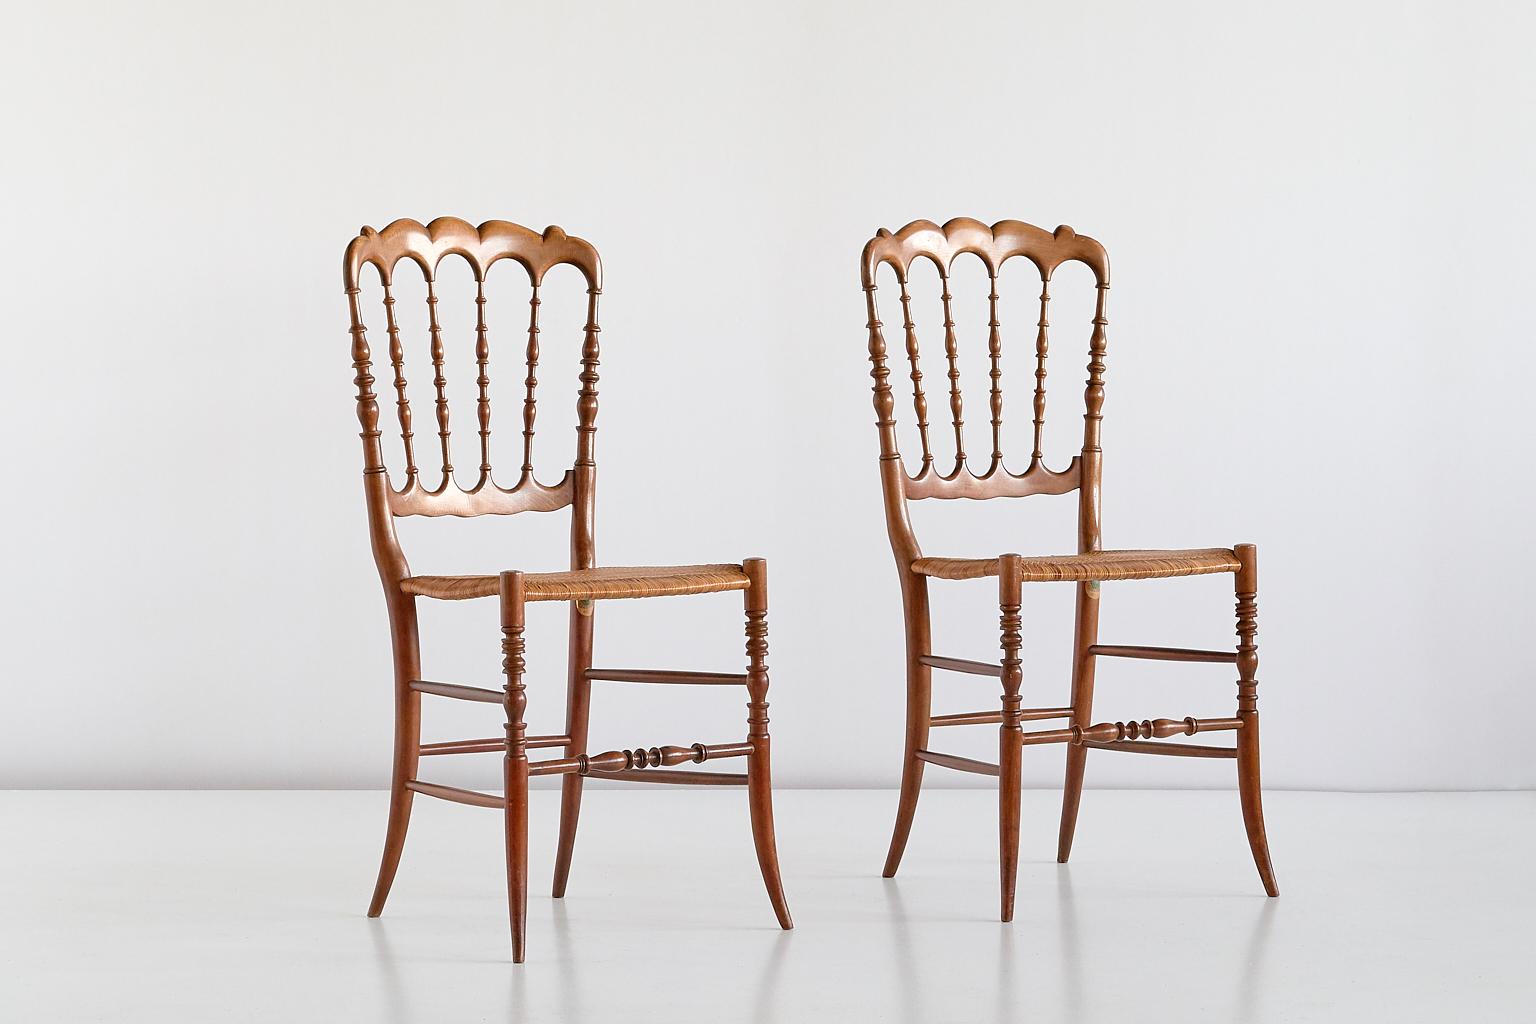 This elegant pair of Chiavari or Chiavarina chairs was designed by Giuseppe Gaetano Descalzi in 1807. The chairs were handmade by Fratelli Zunino and Rivarola in Chiavari in the early 1950s. The natural lacquered frames made of solid beech feature